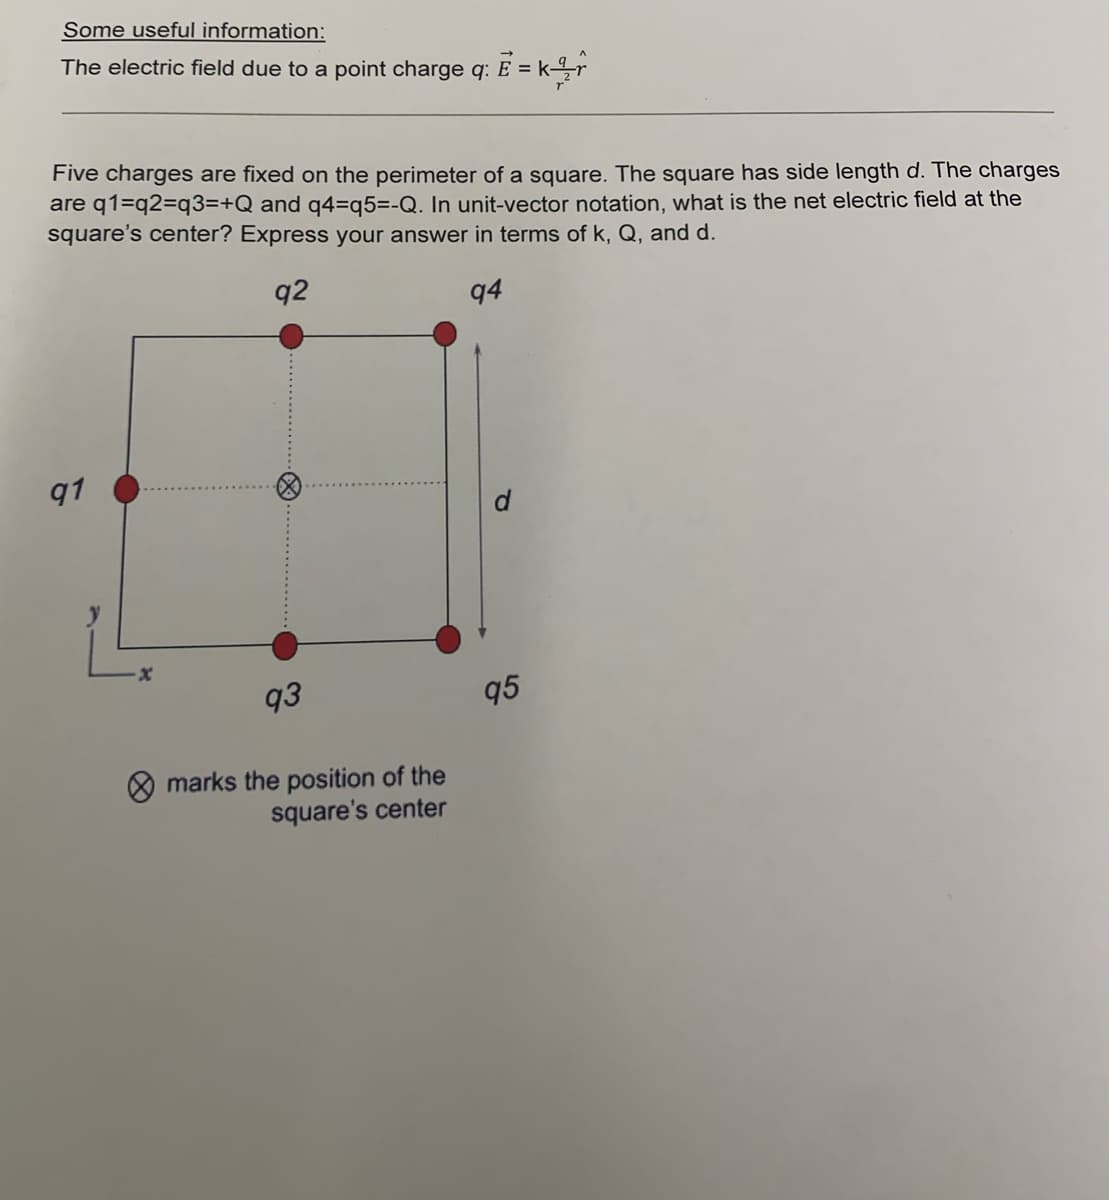 Some useful information:
The electric field due to a point charge q: E = kr
Five charges are fixed on the perimeter of a square. The square has side length d. The charges
are q1 q2=q3=+Q and q4=q5=-Q. In unit-vector notation, what is the net electric field at the
square's center? Express your answer in terms of k, Q, and d.
q2
94
q1
x
93
marks the position of the
square's center
95